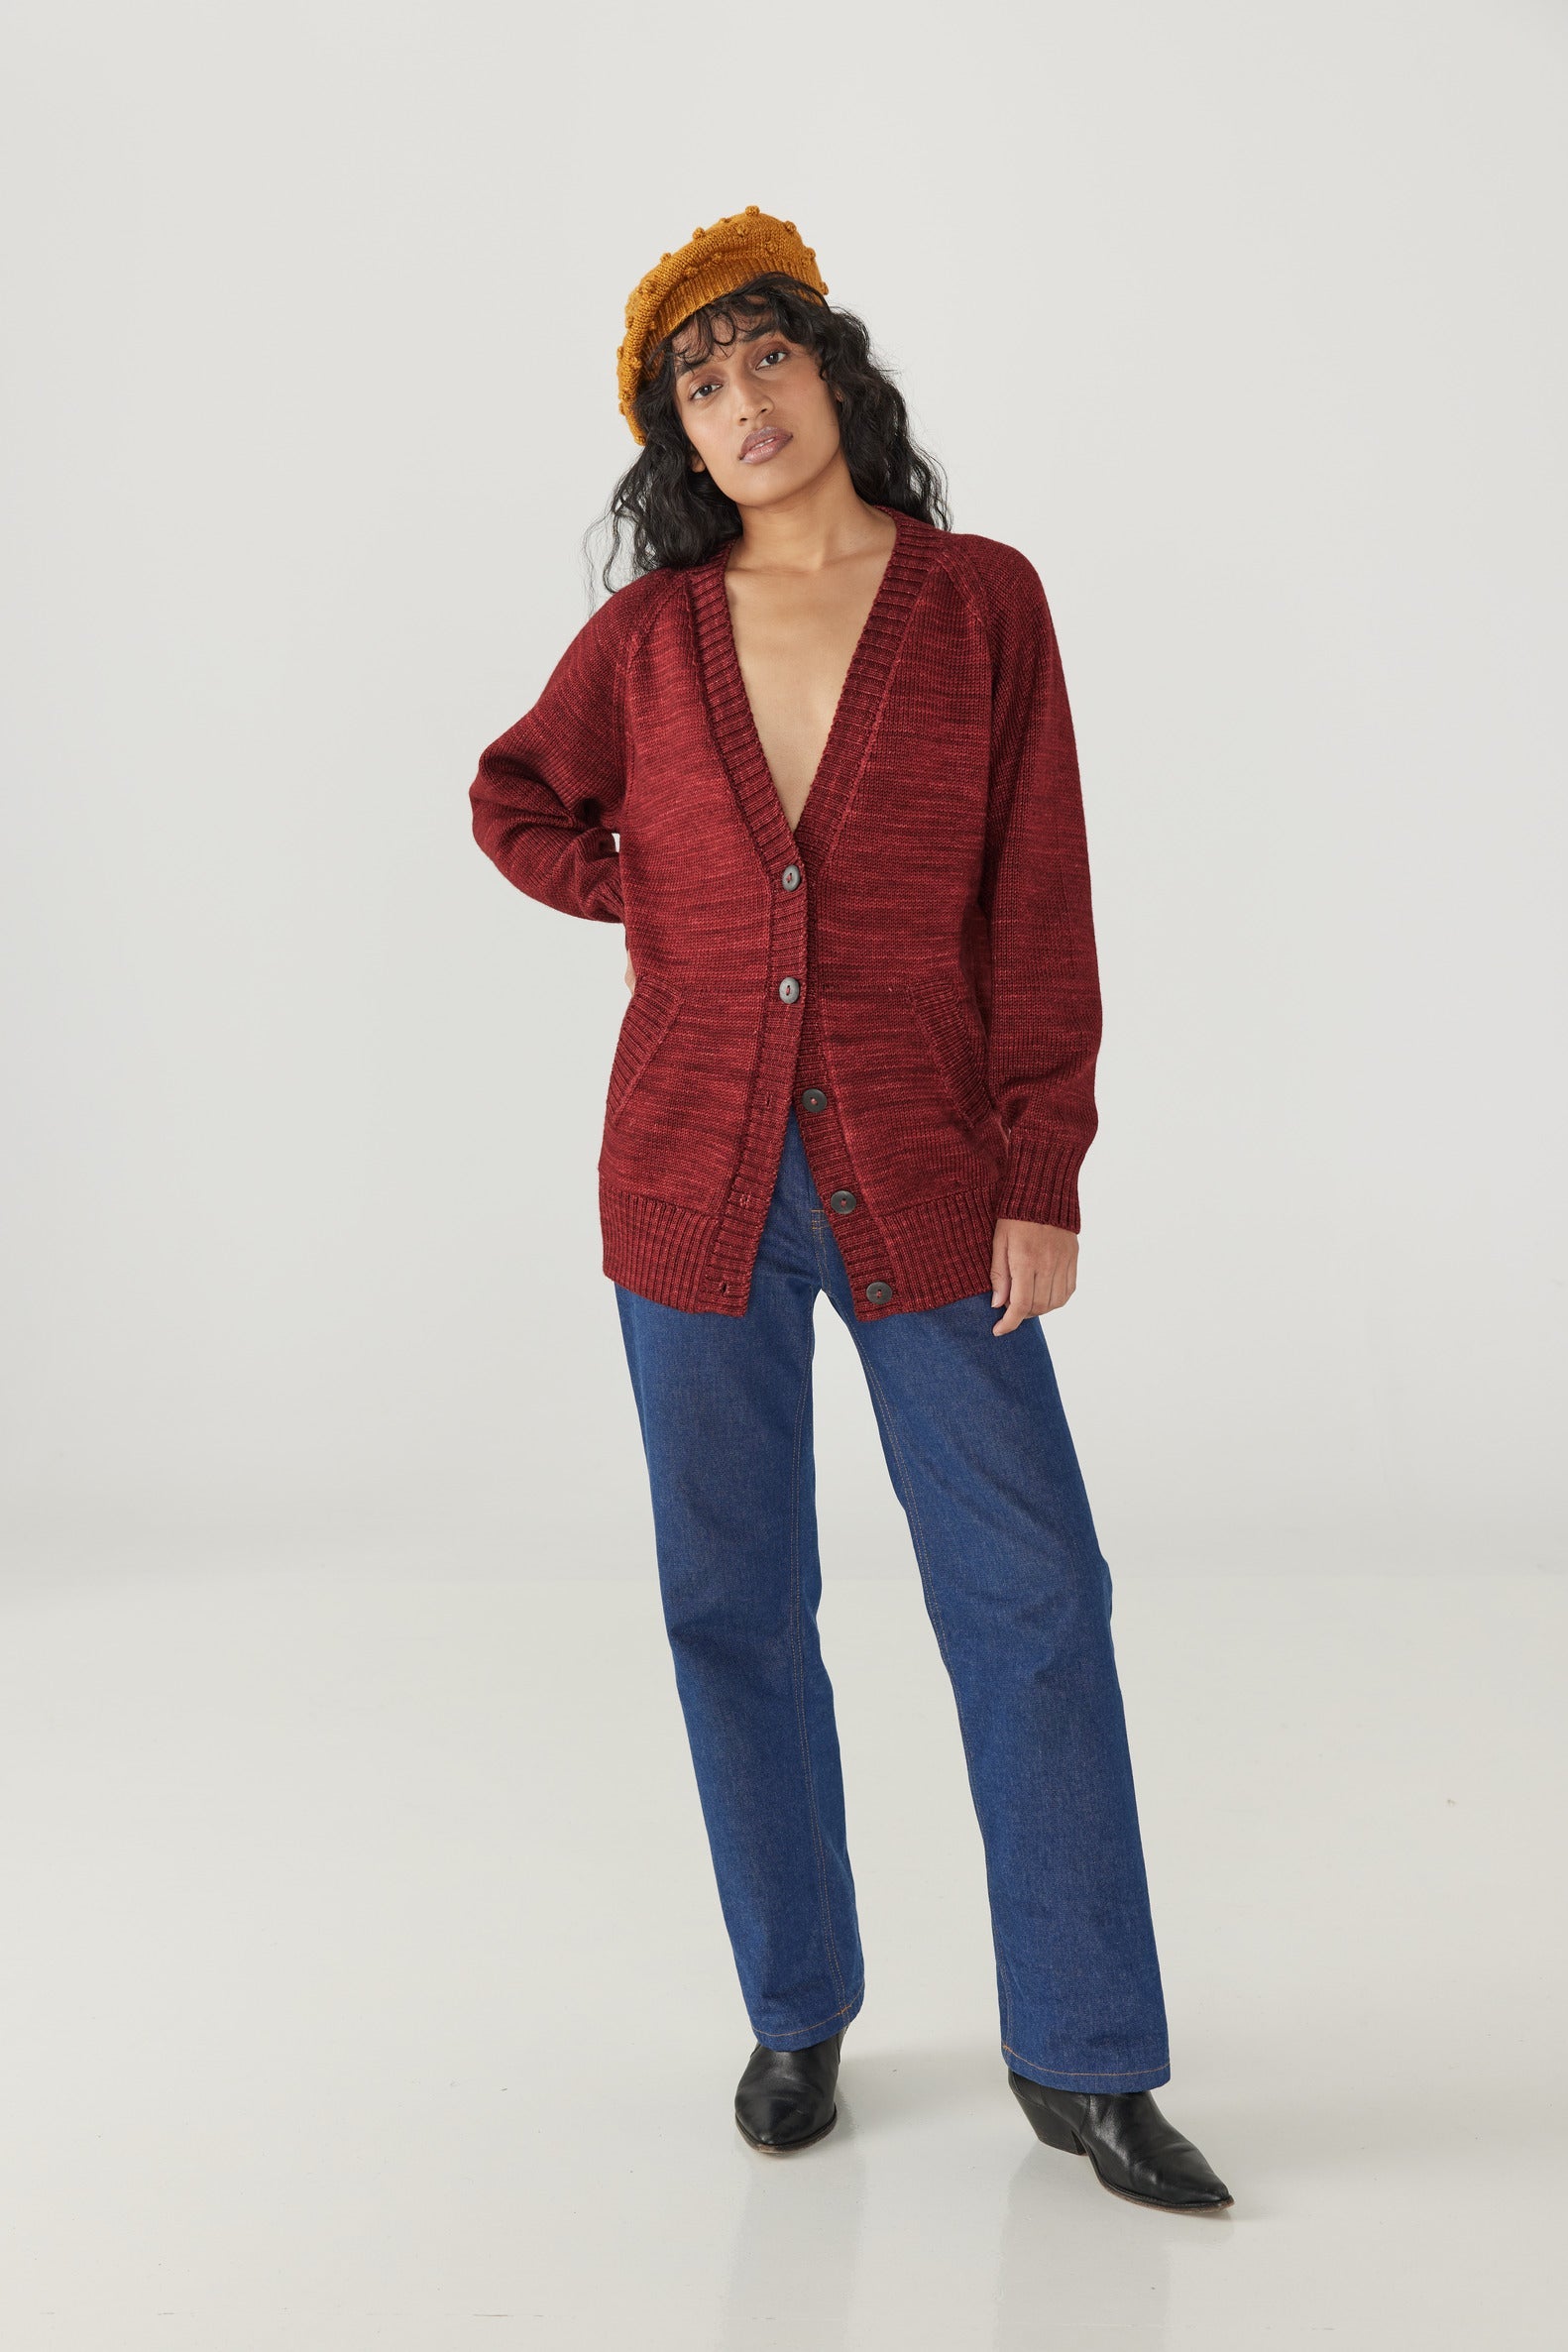 Adult Portfolio Cardigan - Cranberry+Model is 5'9" | 31" Bust | 24" Waist | 34" Hips | size 2, wearing a size X-Small/Small